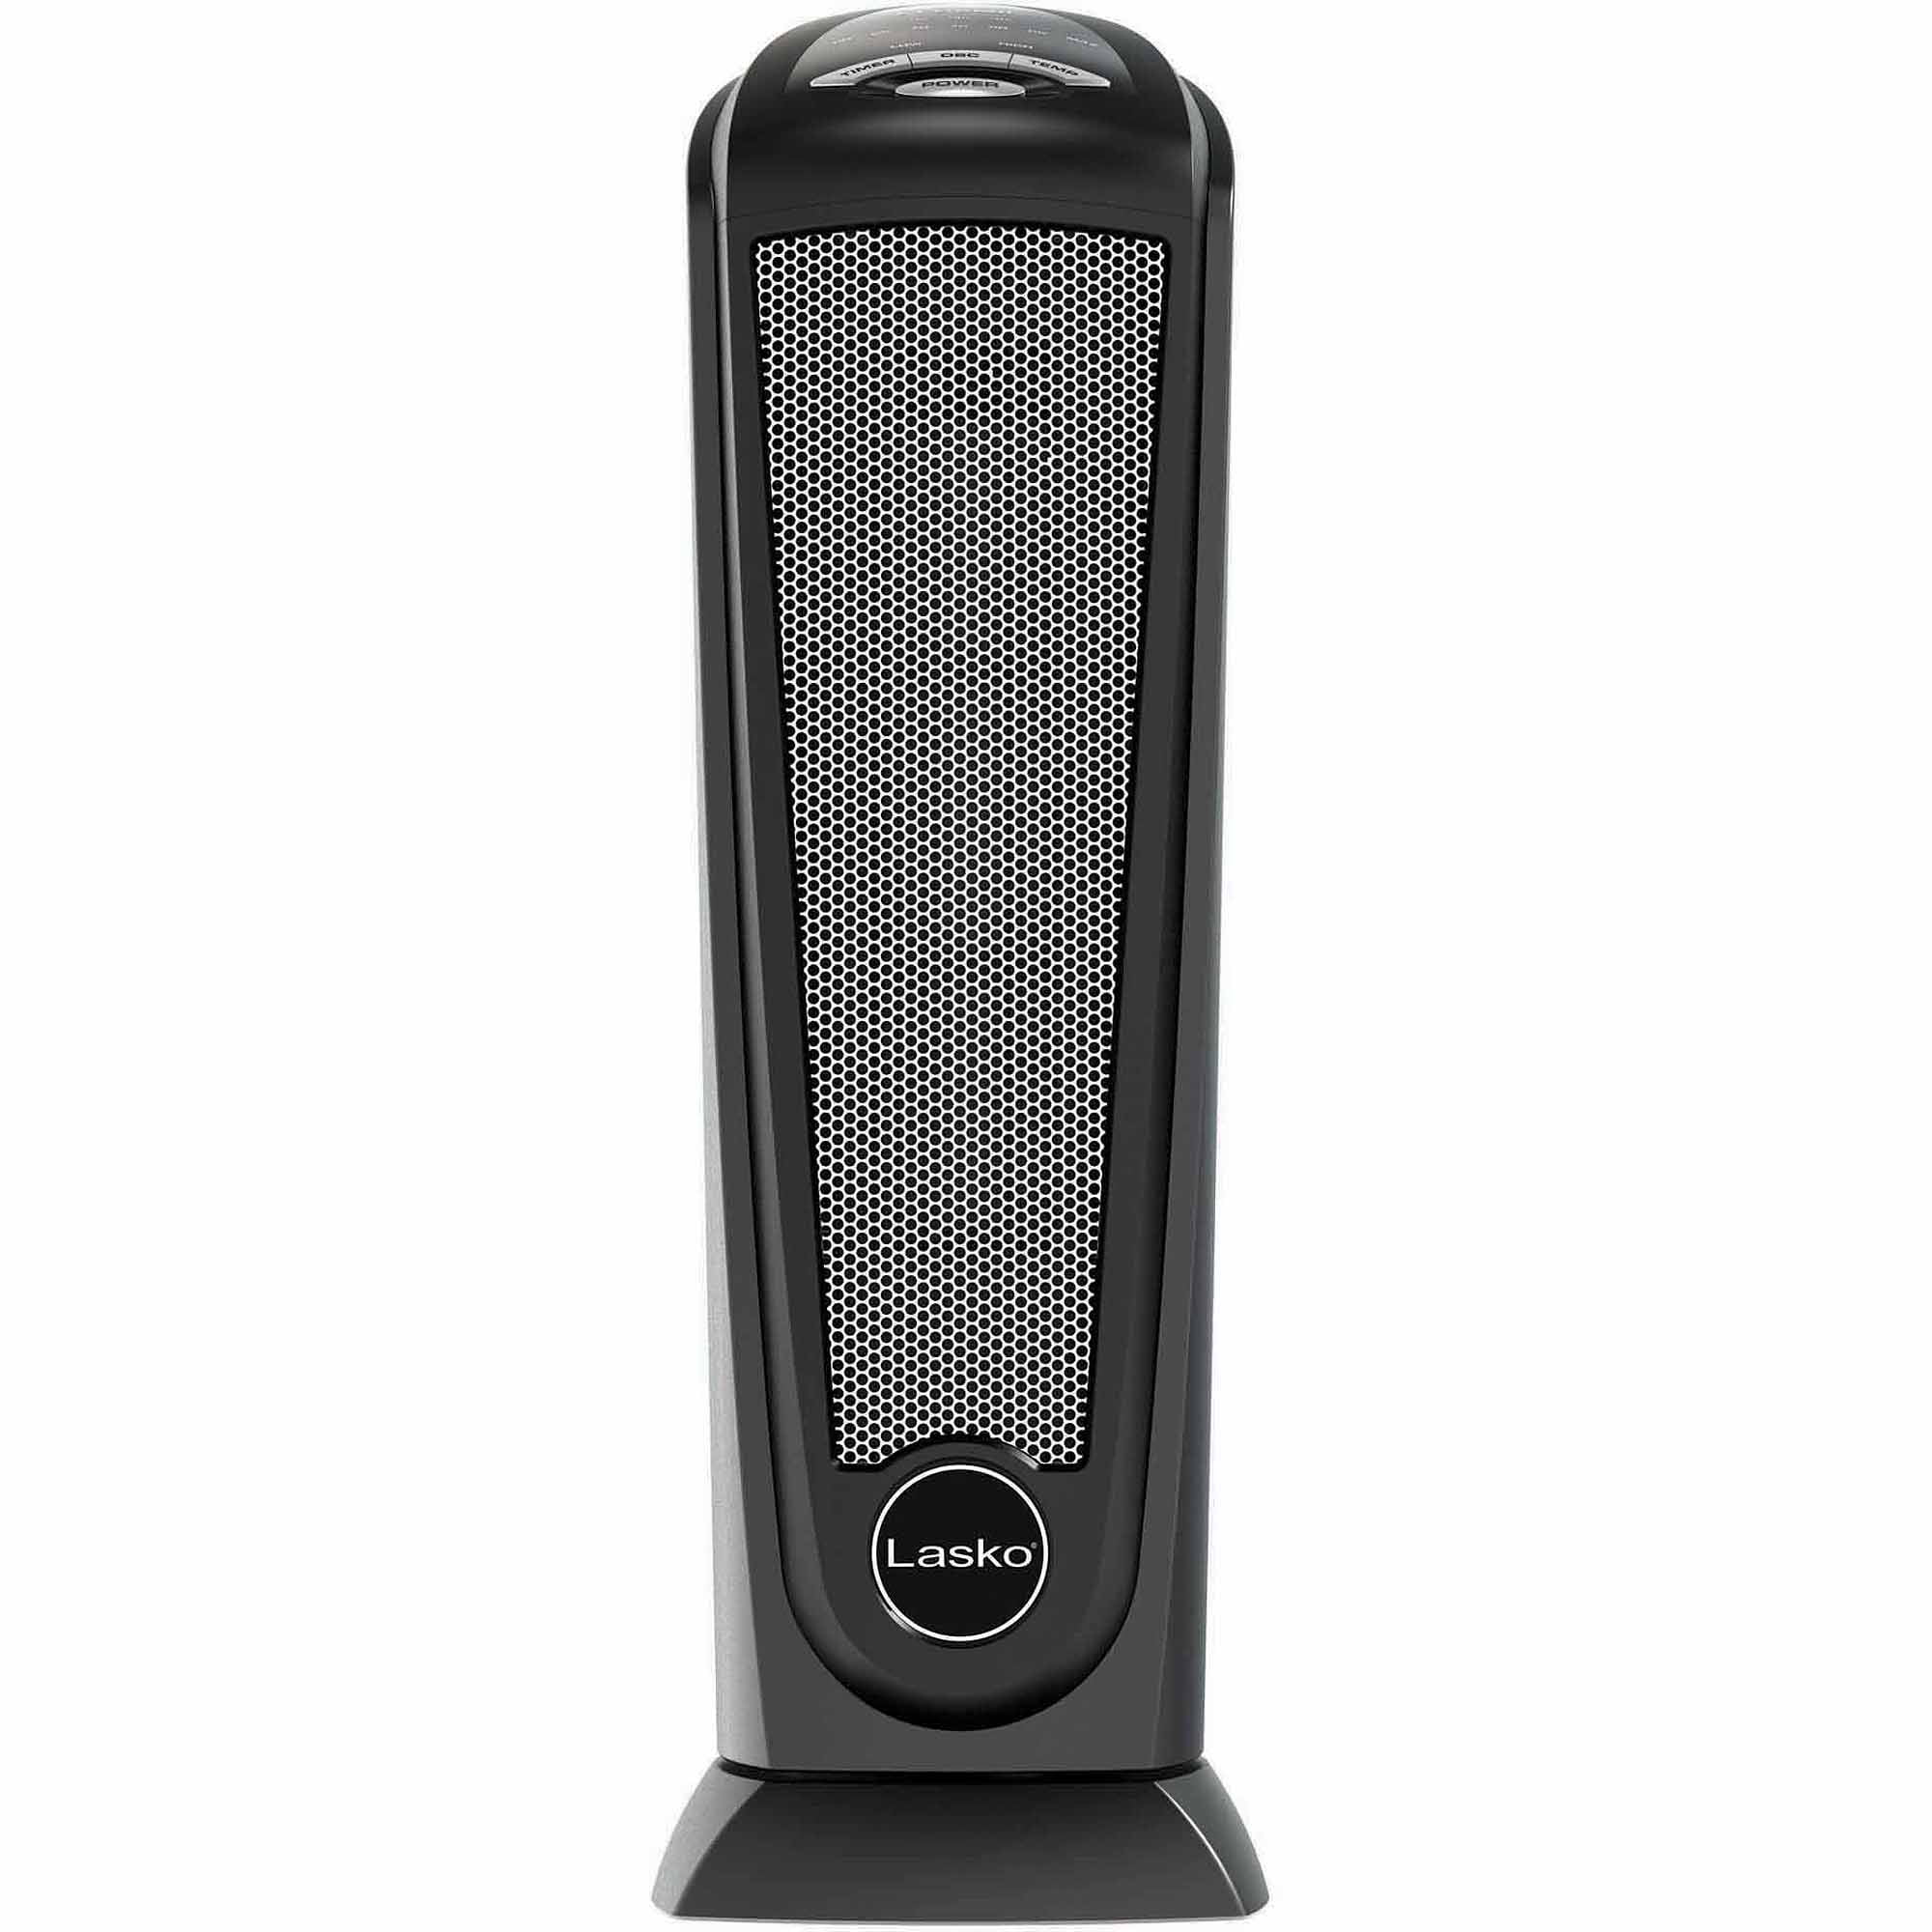 Lasko Portable 1500W Ceramic Tower Oscillating Electric Space Heater with Remote